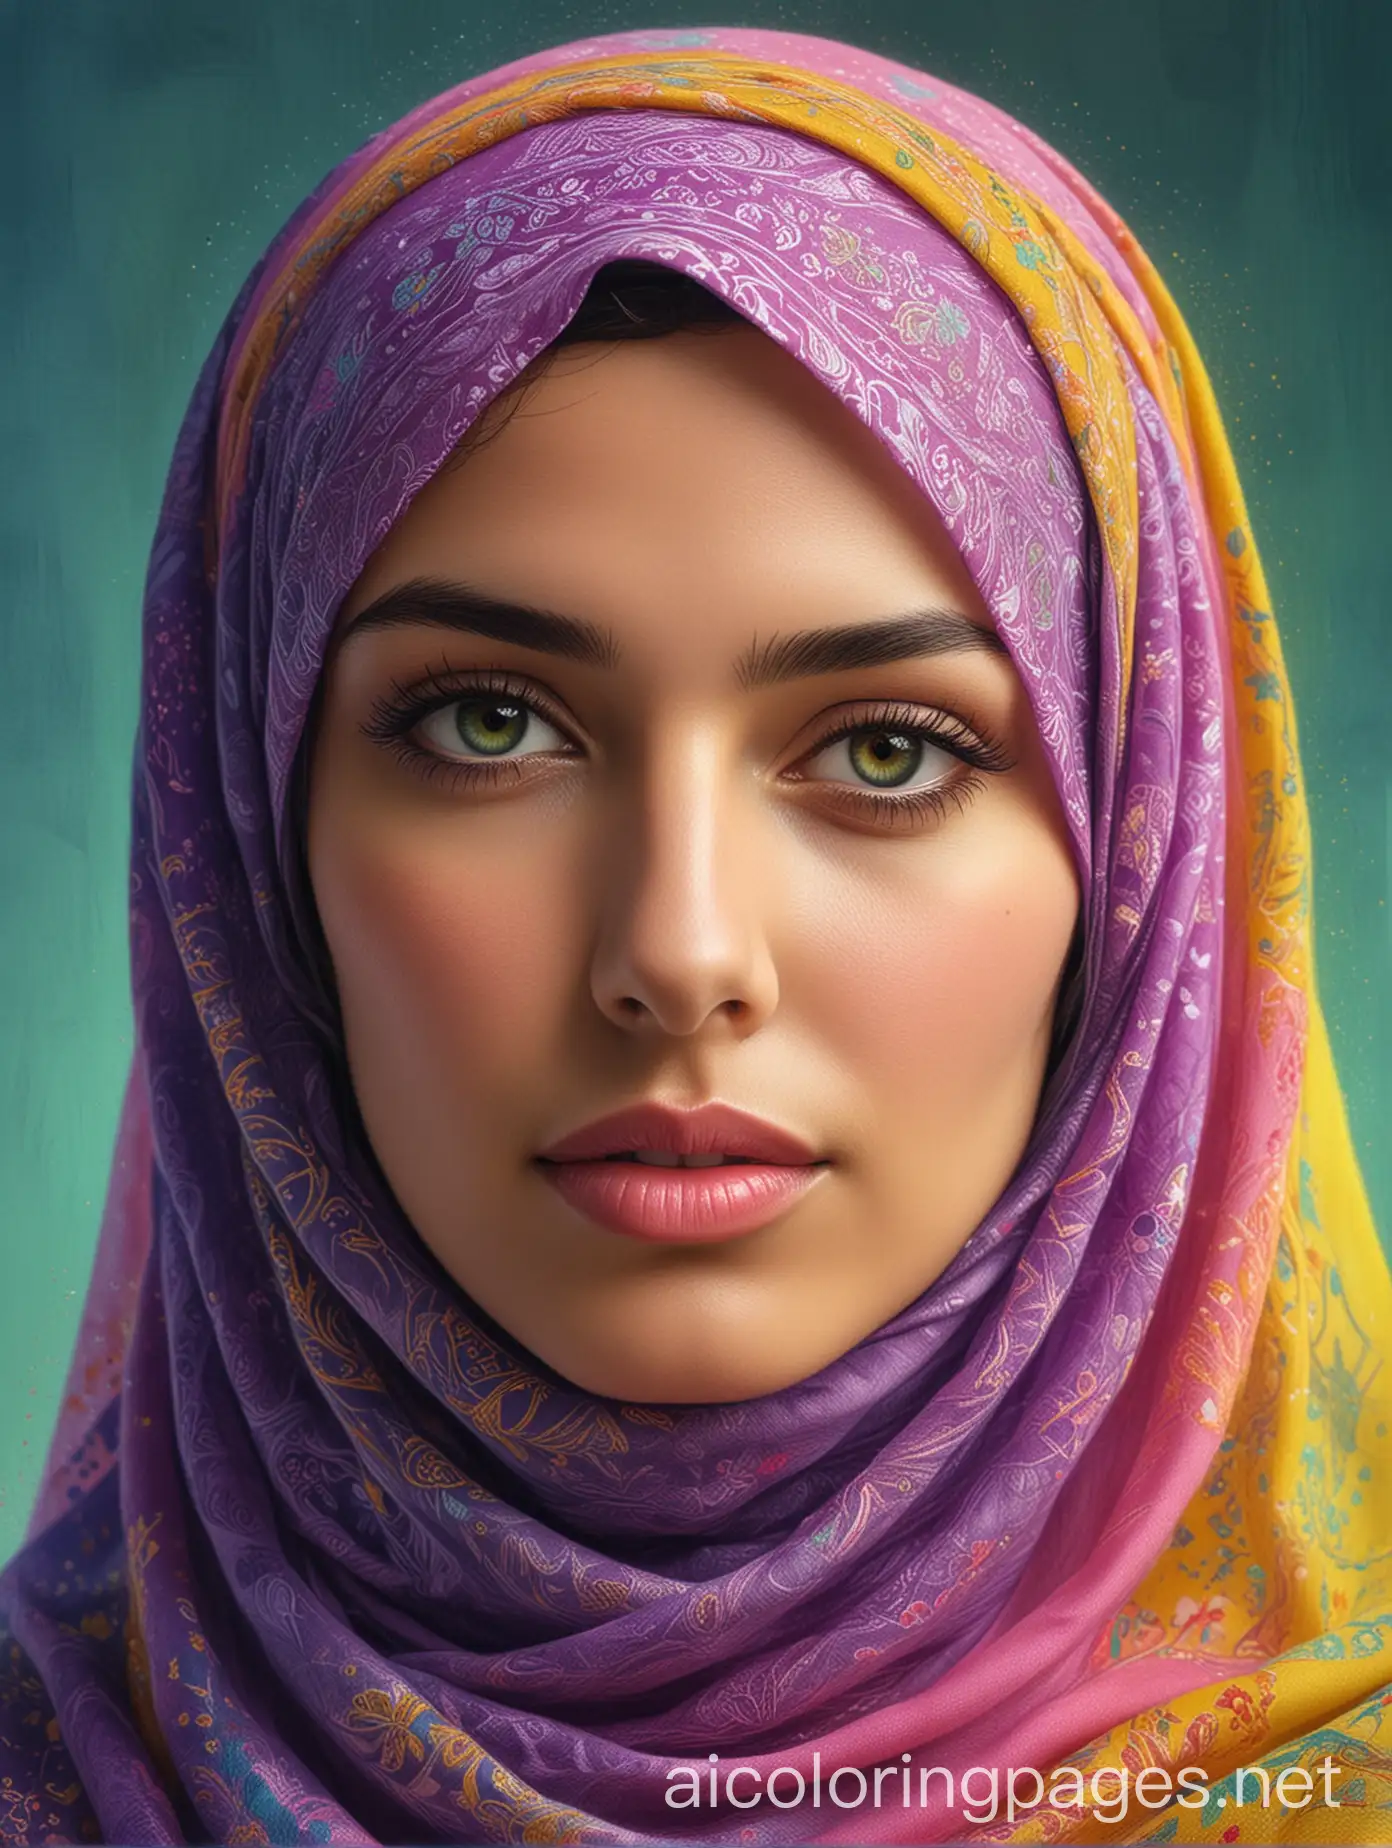 The photo shows a drawing of a woman wearing a hijab. The veil is colored light blue and yellow, and decorated with some other colors such as pink and green. The background of the image contains attractive artistic interference in bright colors, including purple, green, dark blue, and yellow. The drawing is characterized by its digital and artistic nature, giving a sense of modernity and beauty. The facial features are clear and precise, and reflect an artistic and creative touch.